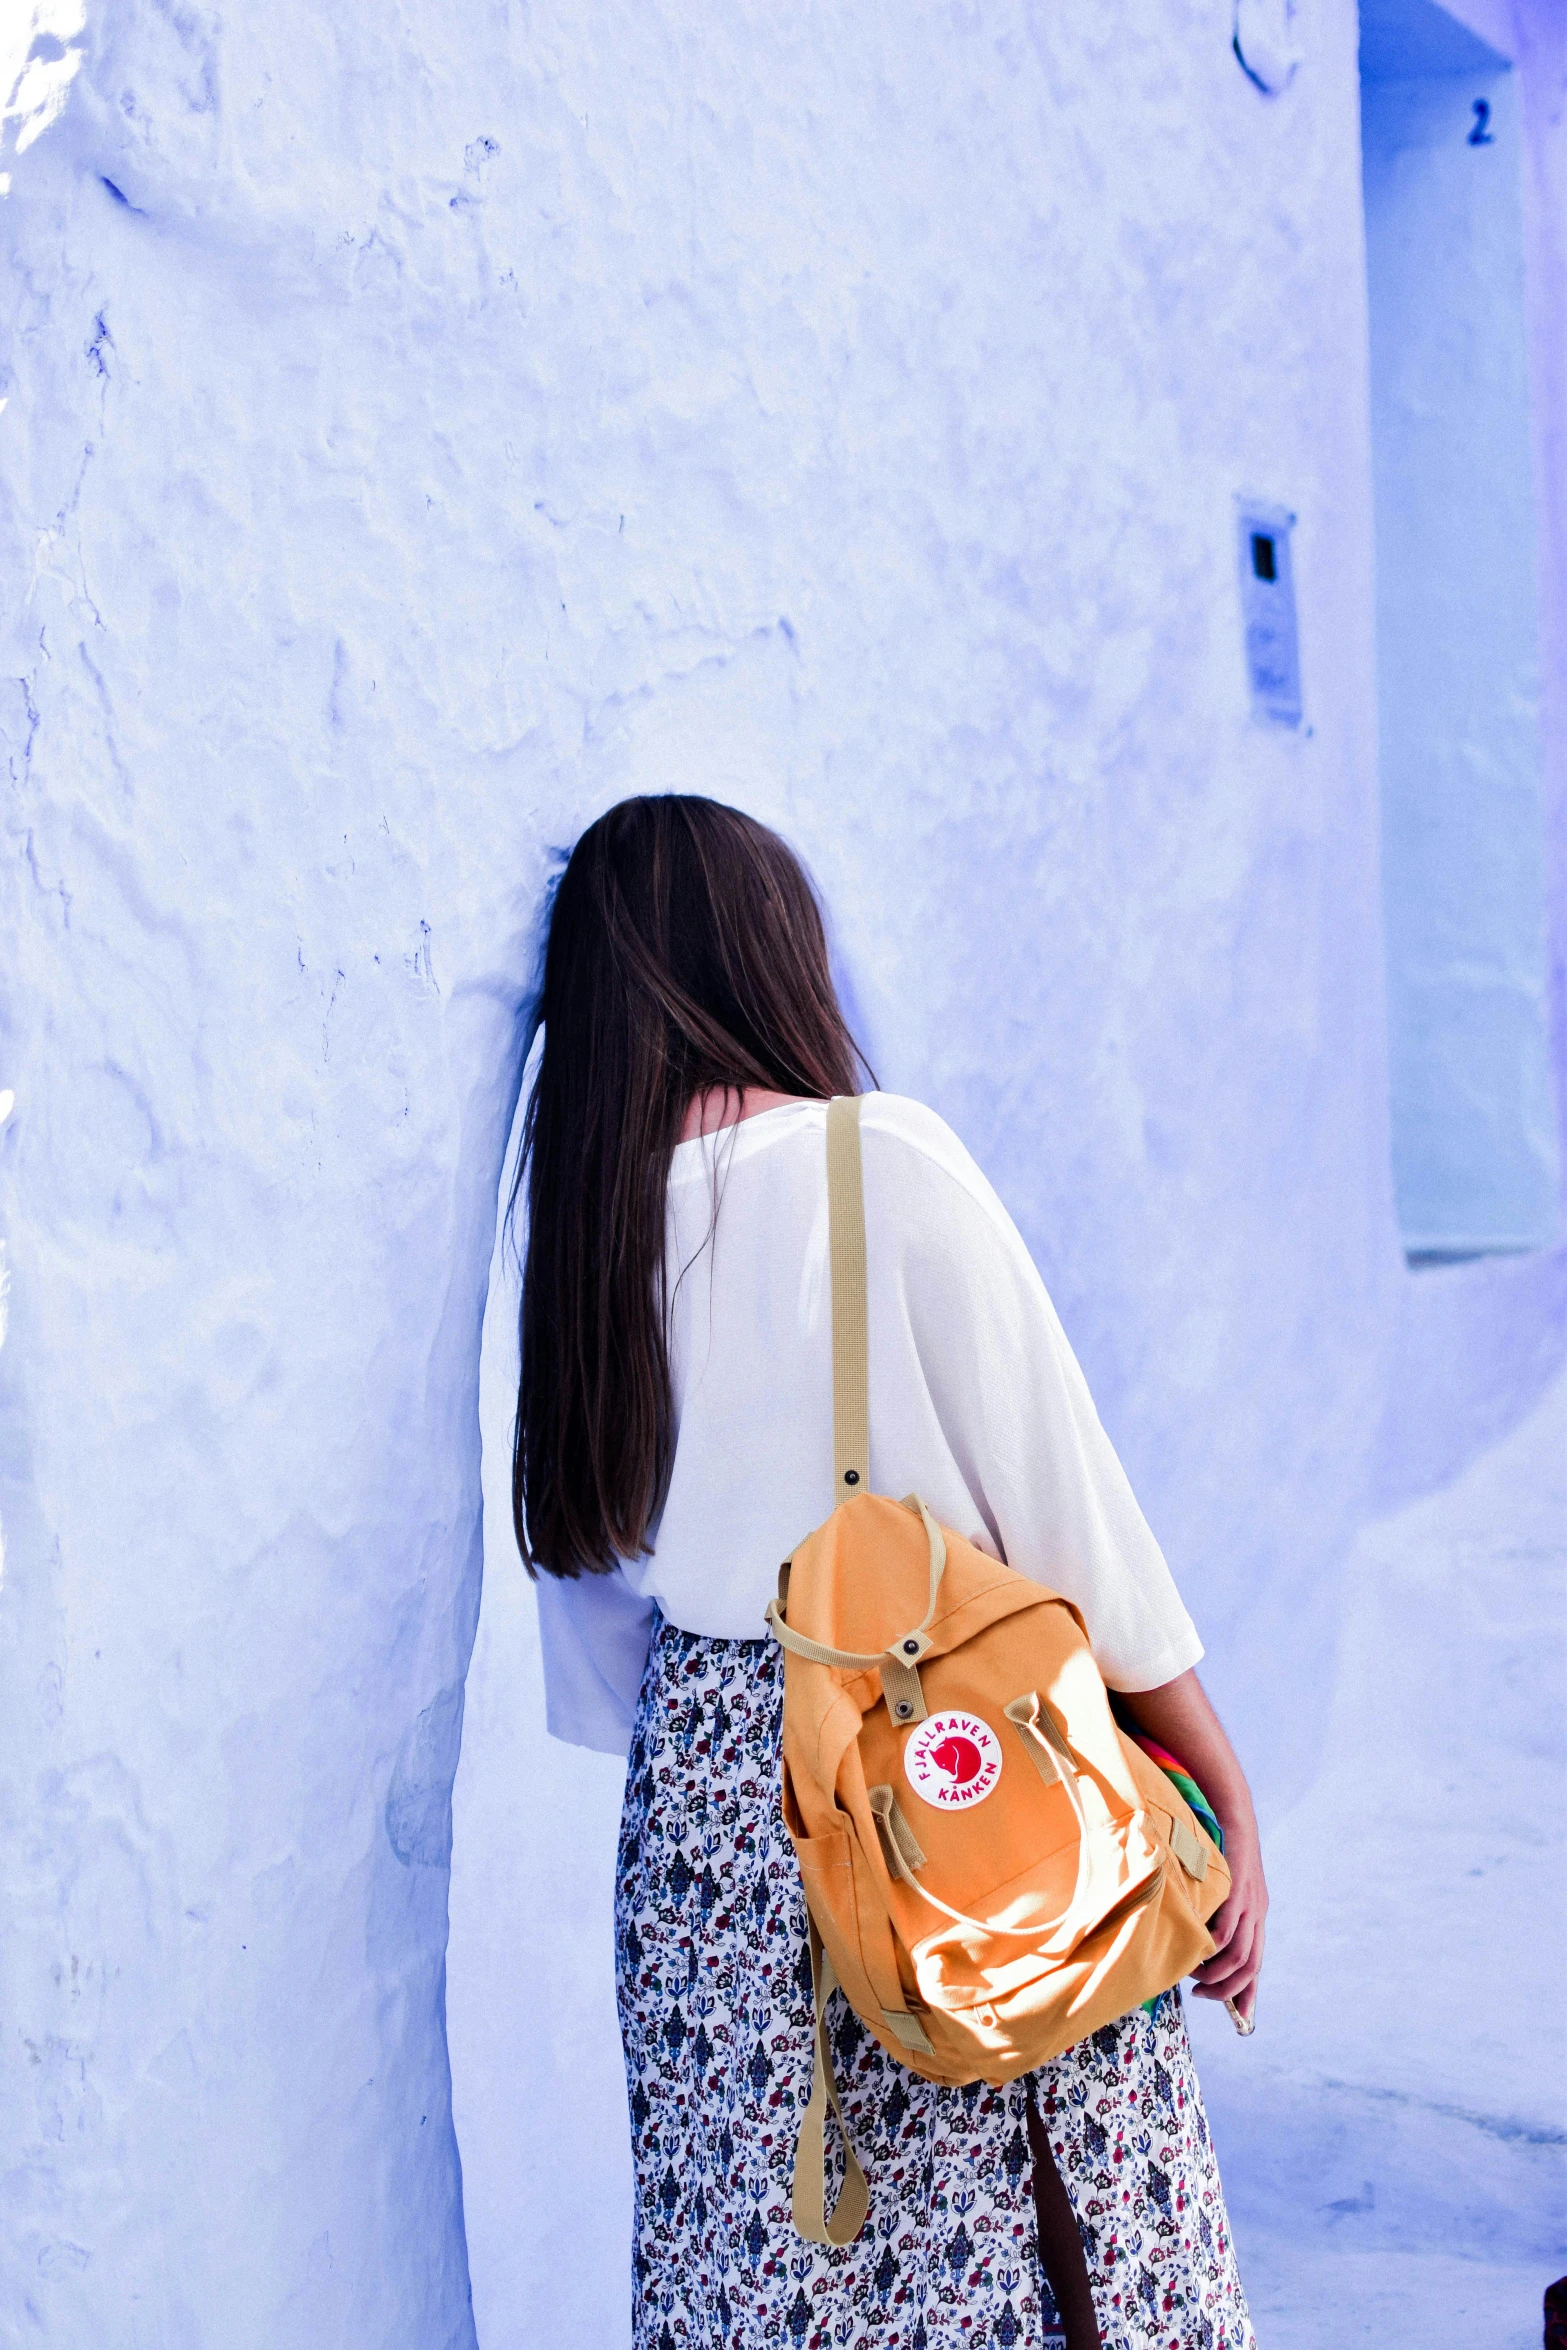 a woman in a white top and a yellow backpack